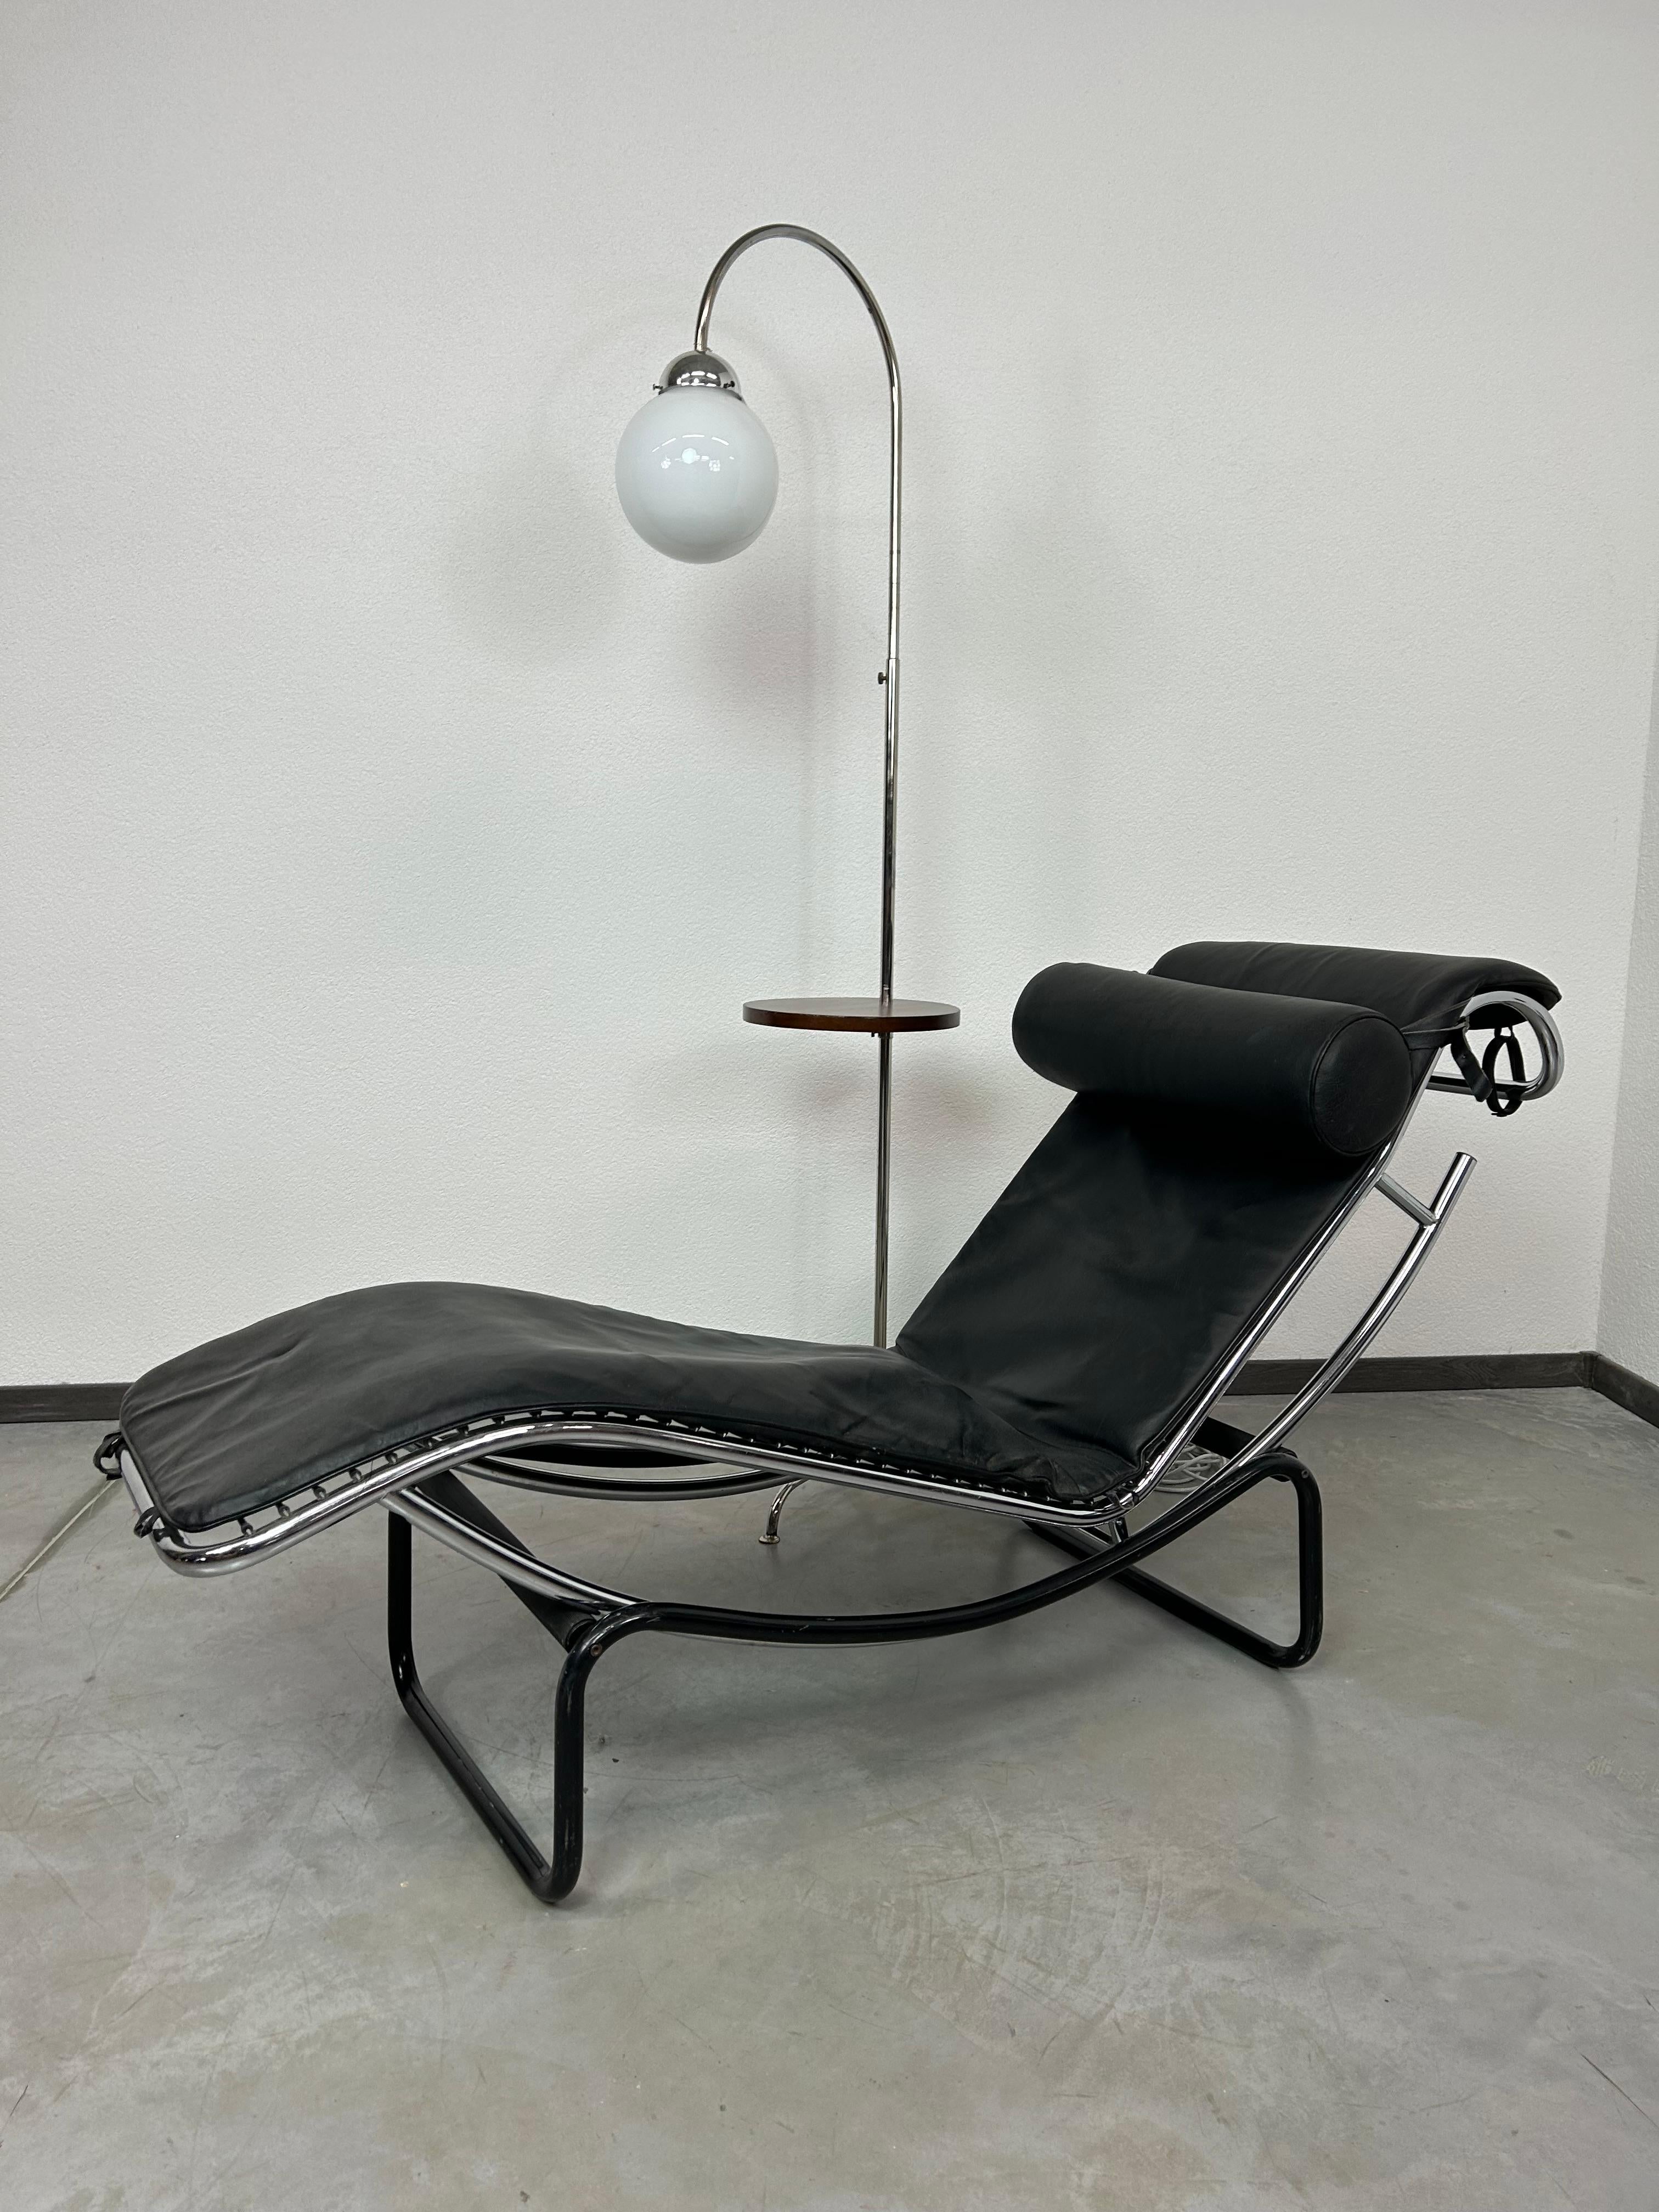 Finnish leather lounge chair named Amaca displayed in 1993 Stemma catalogue. Inspired by Le Courbisier LC4. Chrome plated tubular steel frame with leather upholstery. In very good original condition with signs of use.